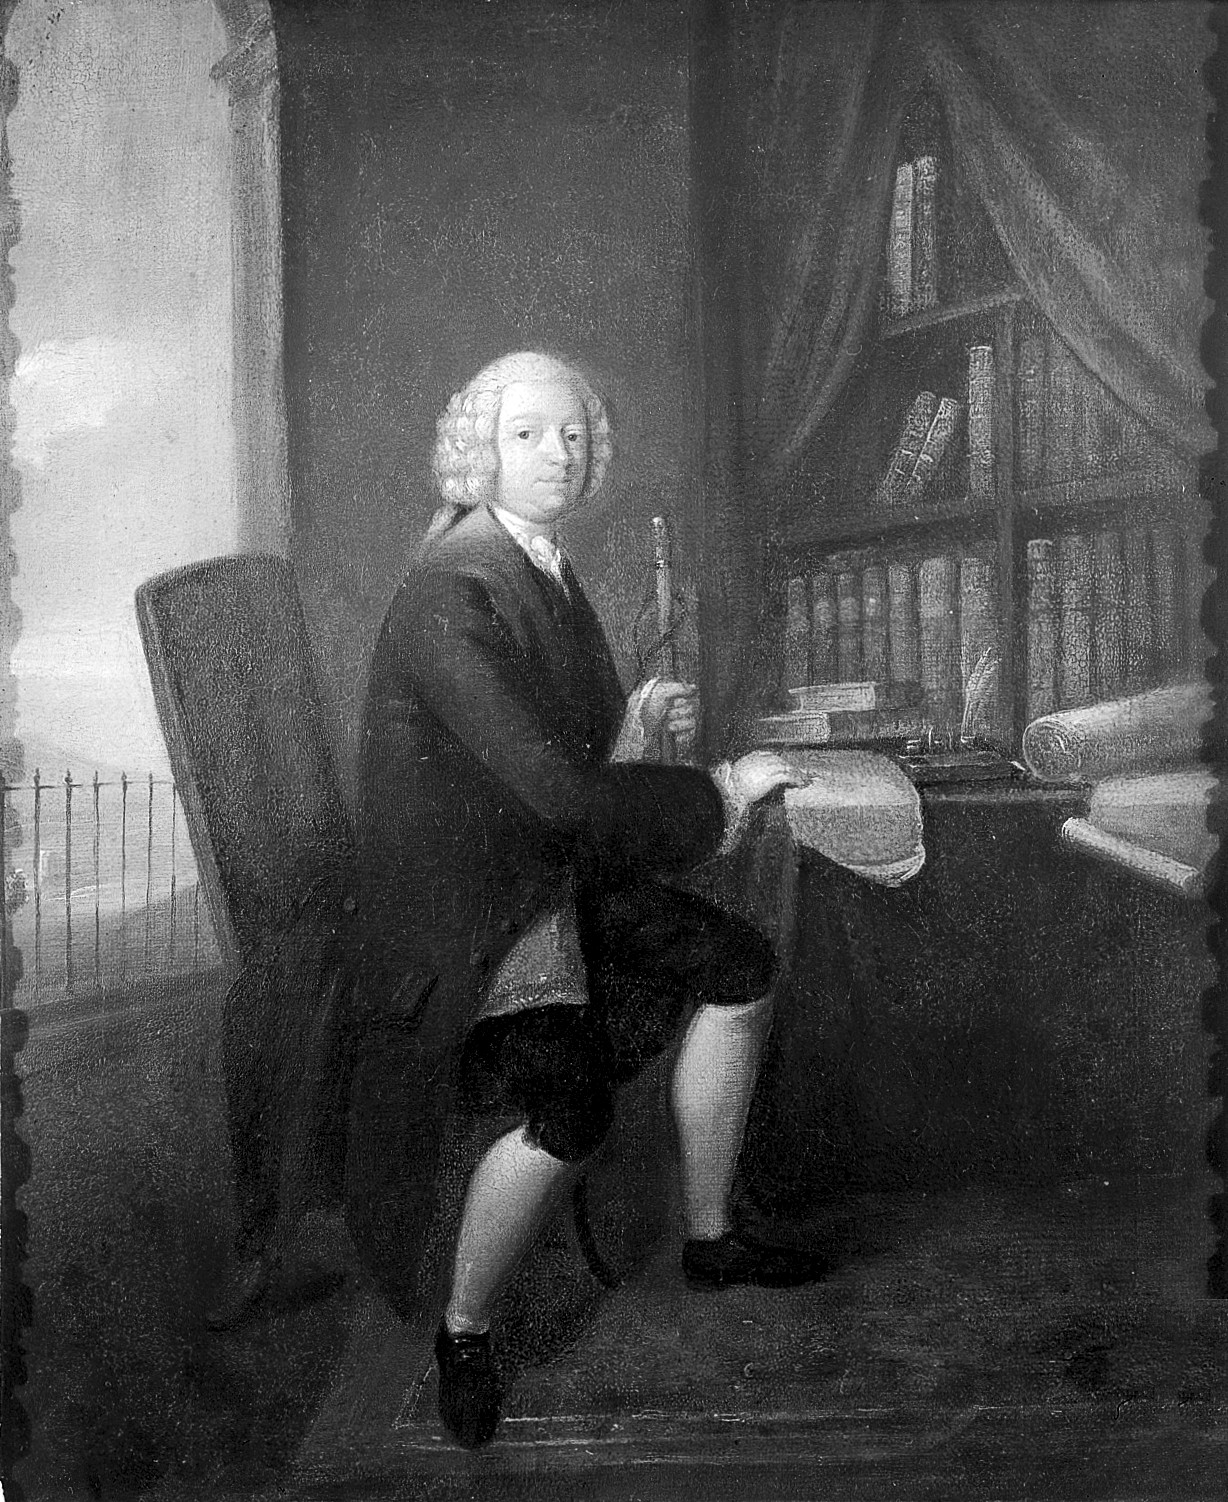 A portrait of a man sitting in a chair.